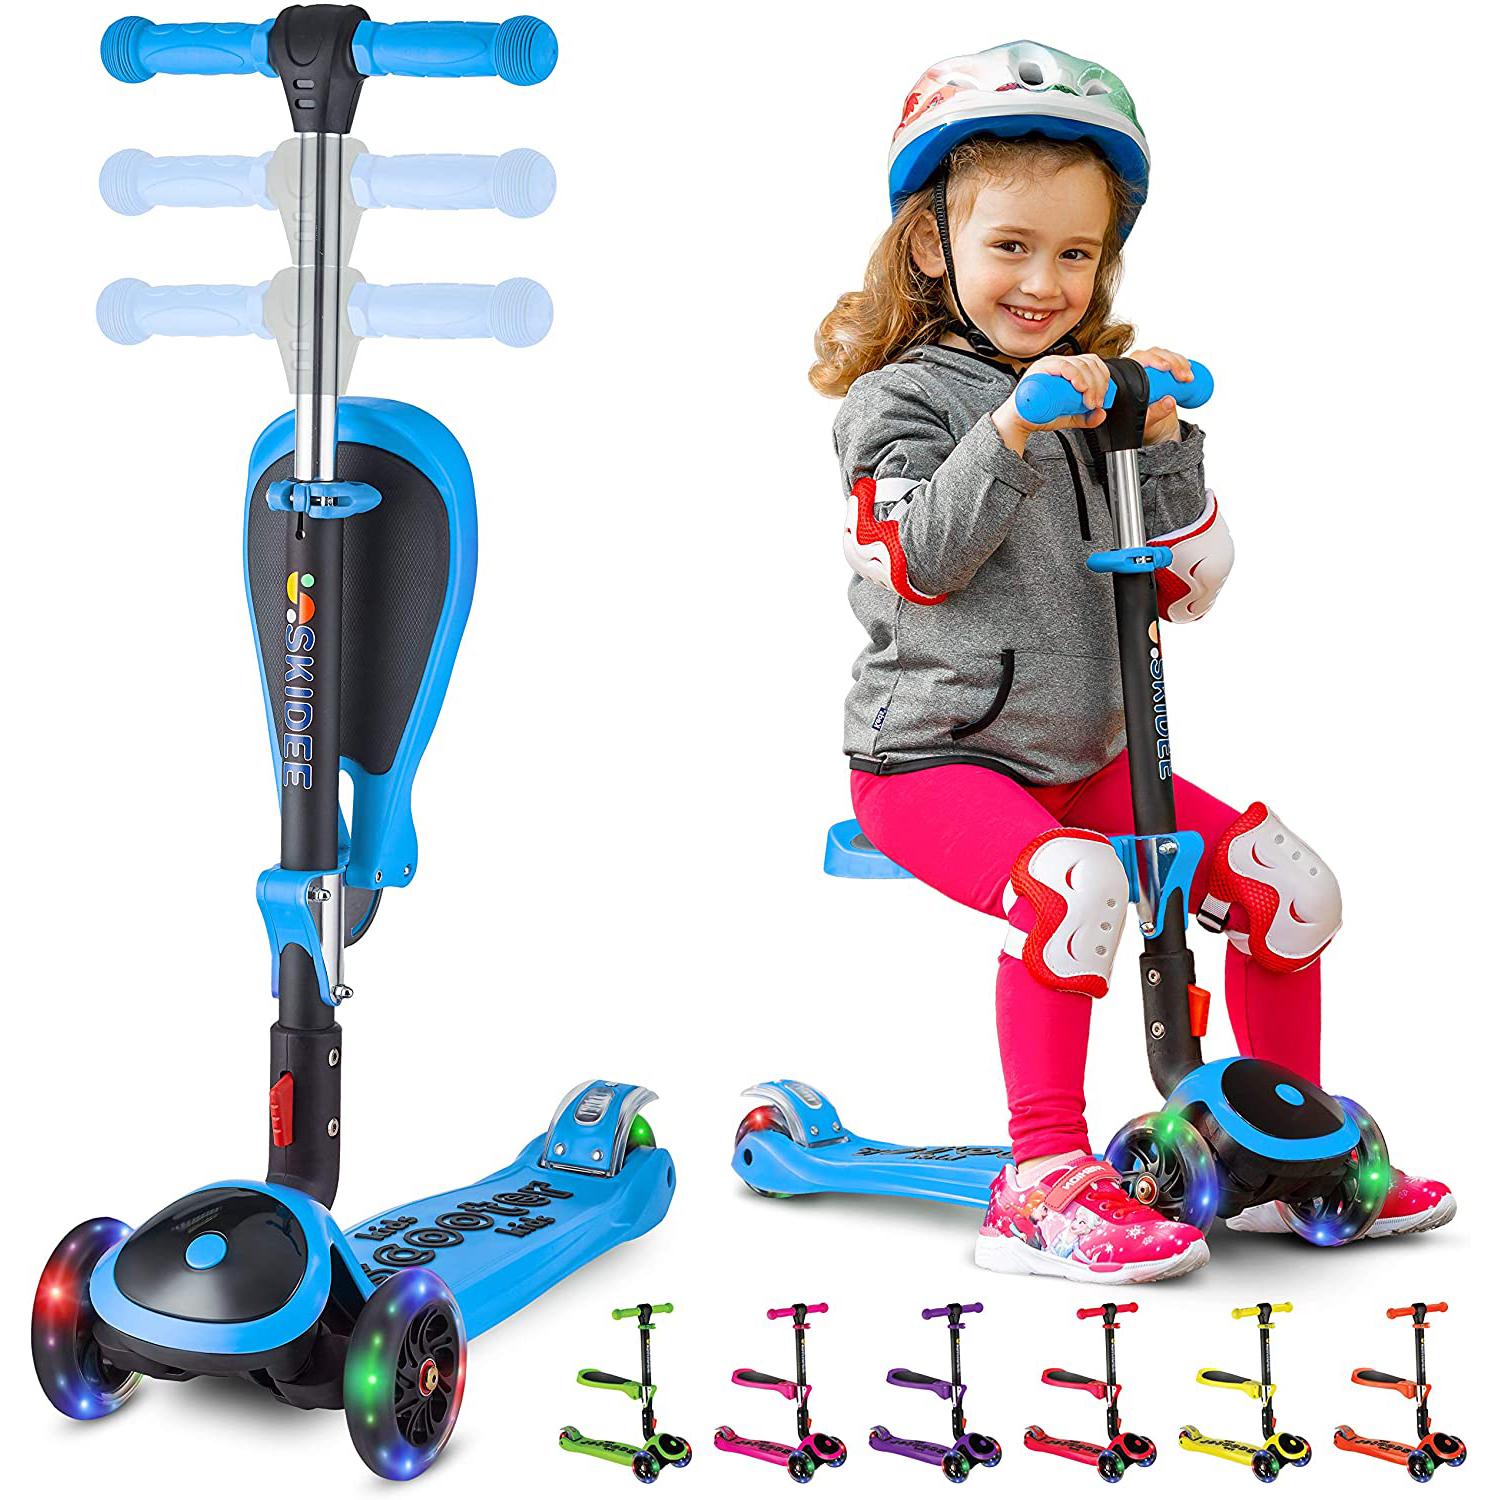 Y100 2-in-1 Scooter for Kids for $47 Shipped